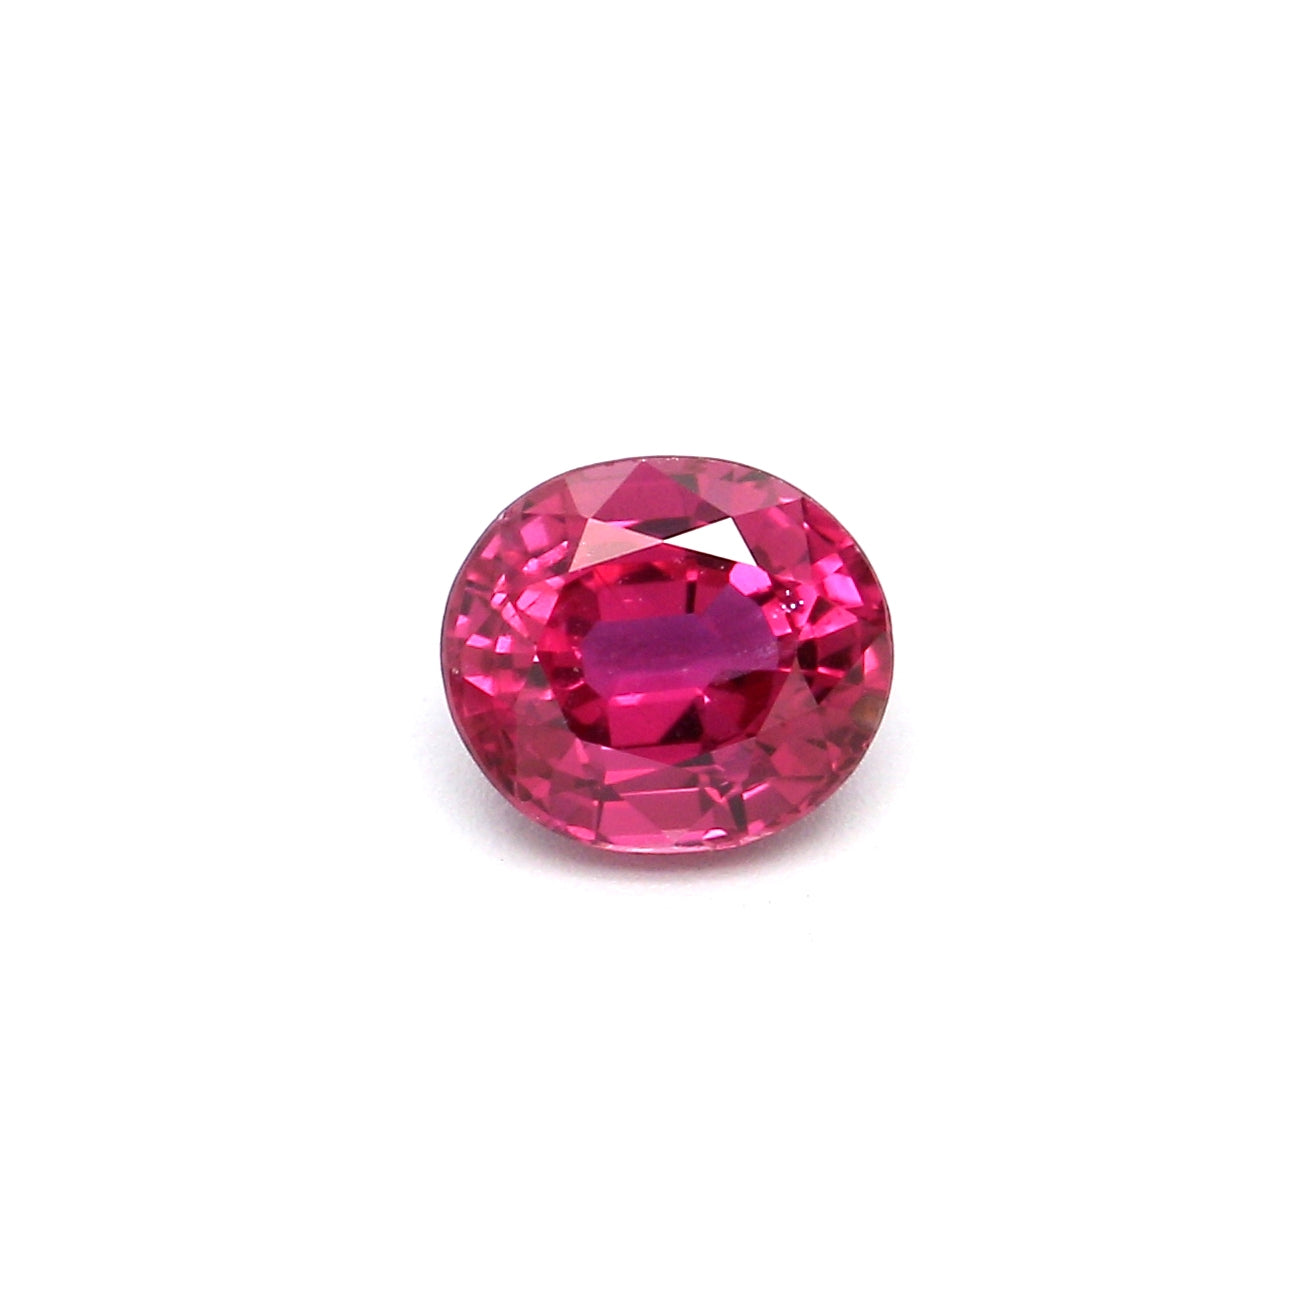 0.52ct Pinkish Red, Oval Ruby, Heated, Thailand - 4.97 x 4.36 x 2.80mm